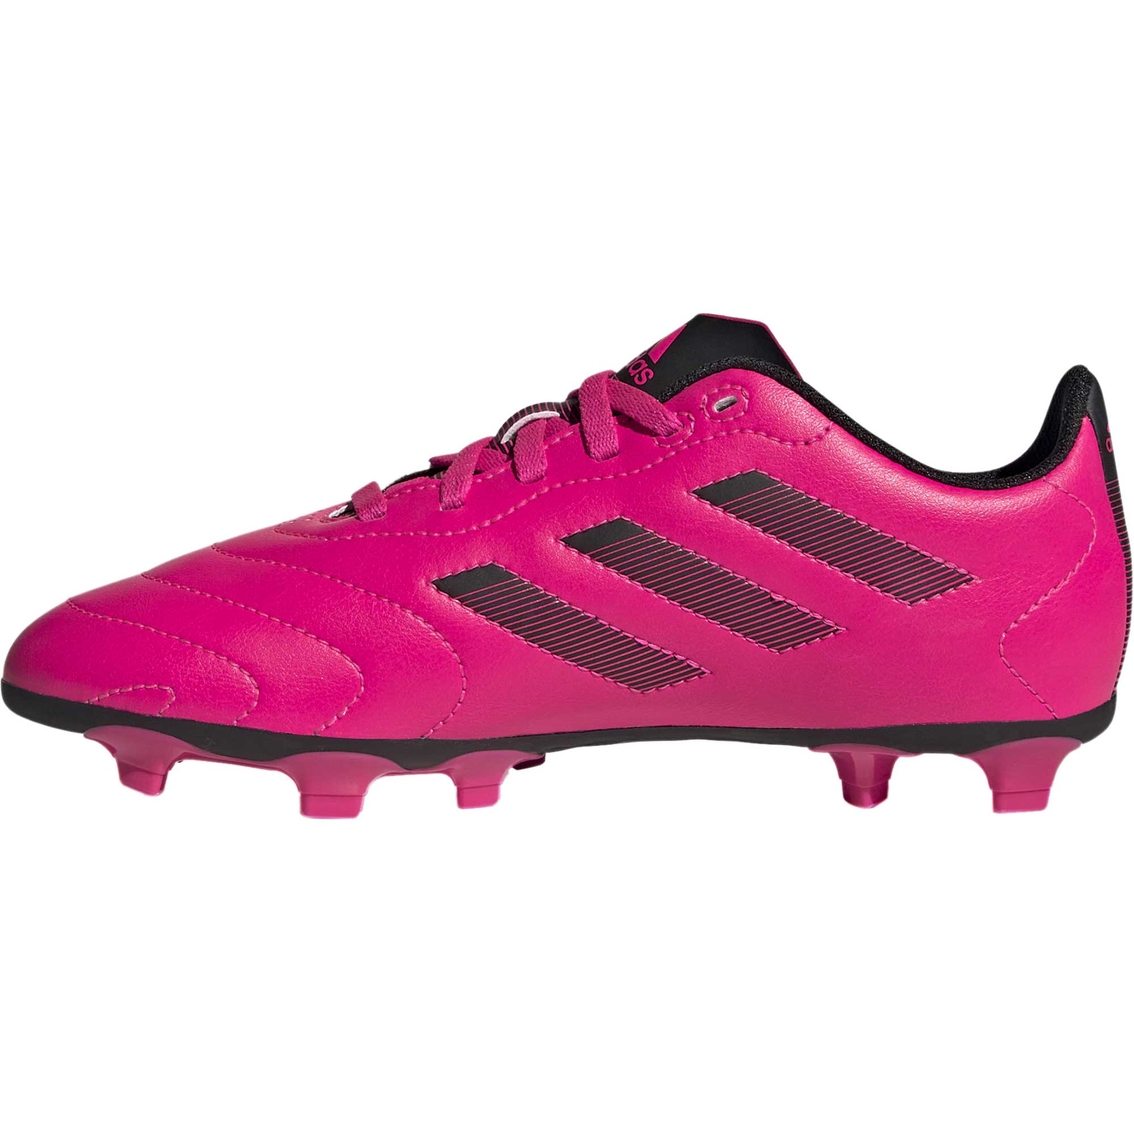 Adidas Grade School Girls Goletto VII Firm Ground Jr. Soccer Cleats - Image 3 of 8